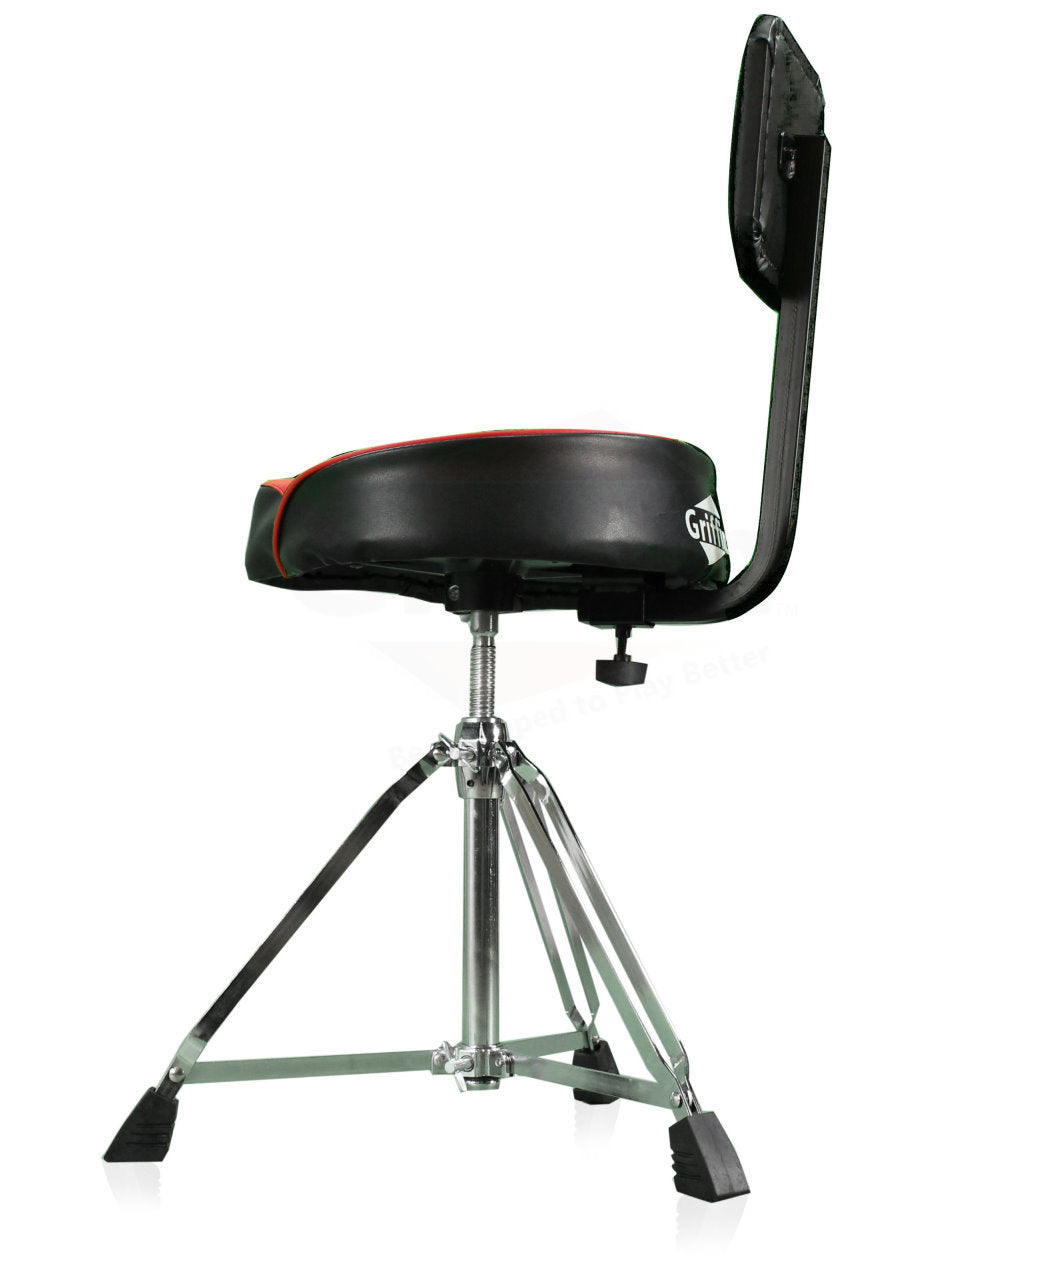 Saddle Drum Throne with Backrest Support by GRIFFIN - Padded Leather Drummer Motorcycle Biker Style